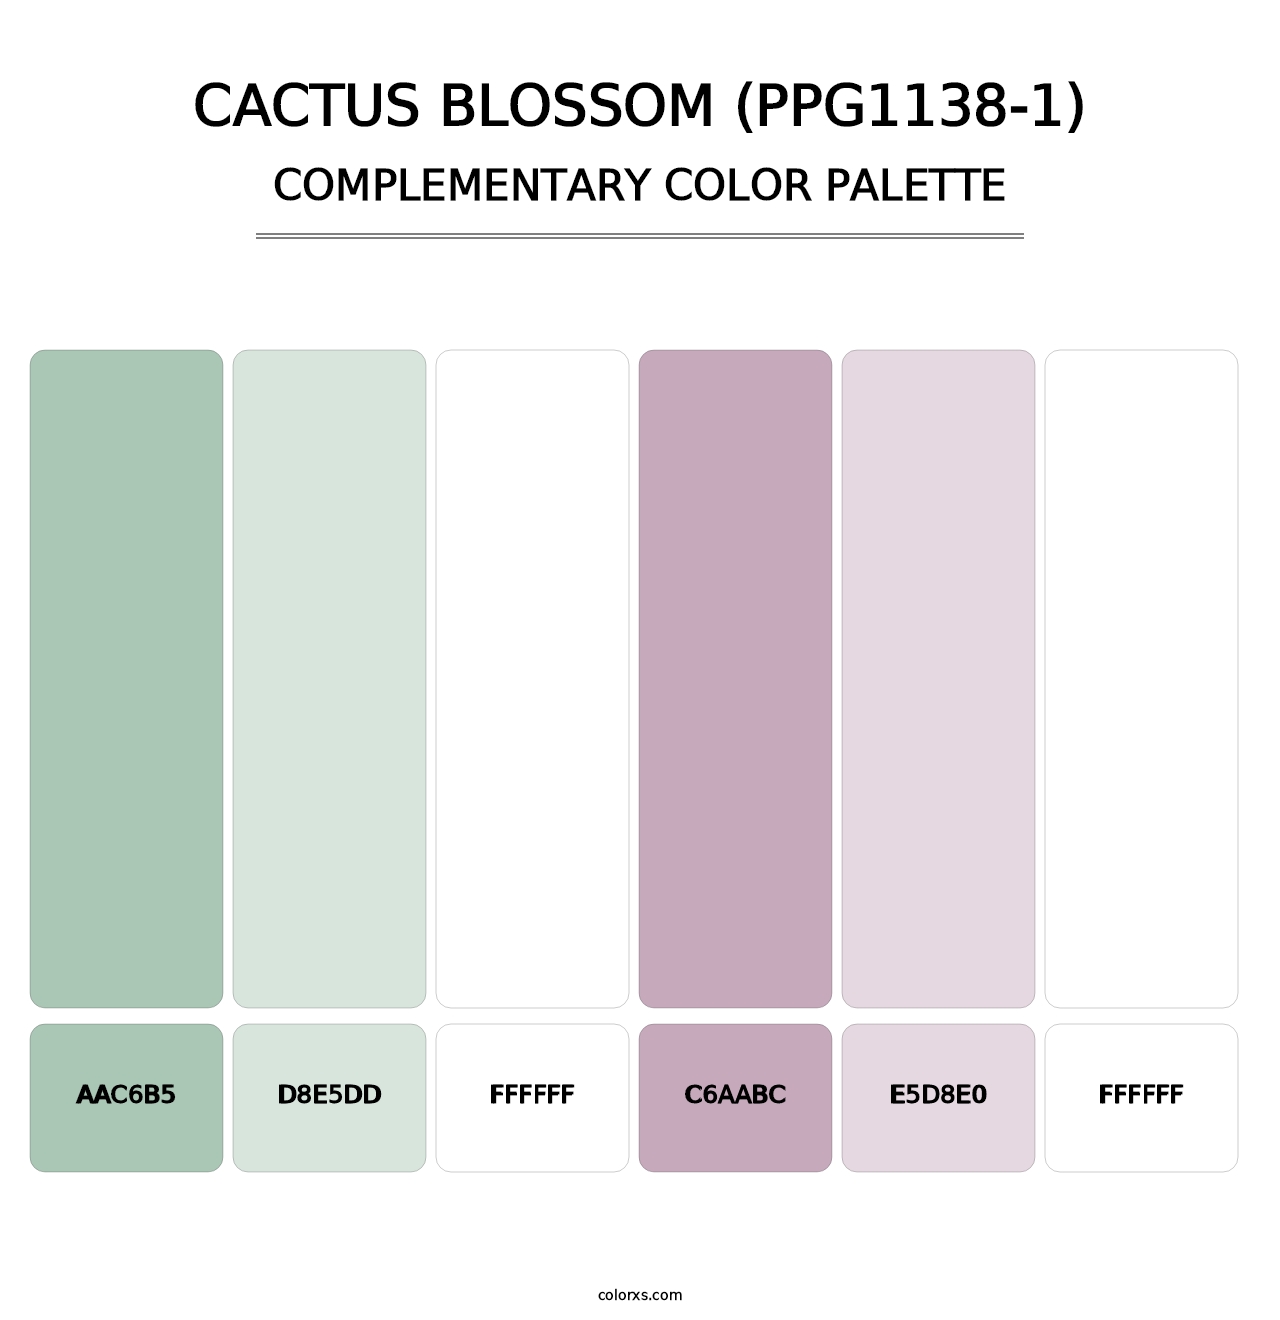 Cactus Blossom (PPG1138-1) - Complementary Color Palette